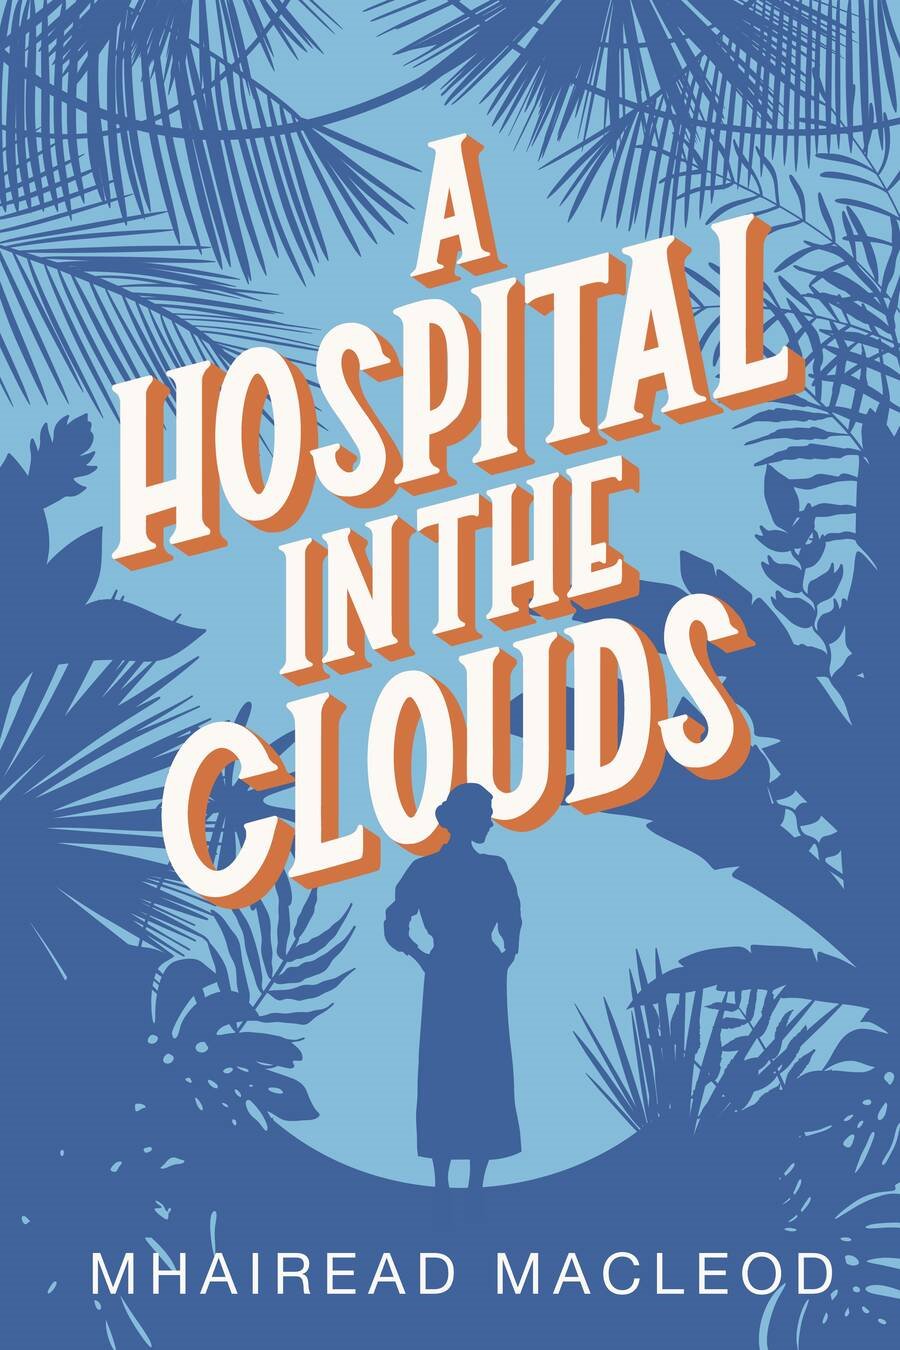 A Hospital in the Clouds - Mhairead Macleod